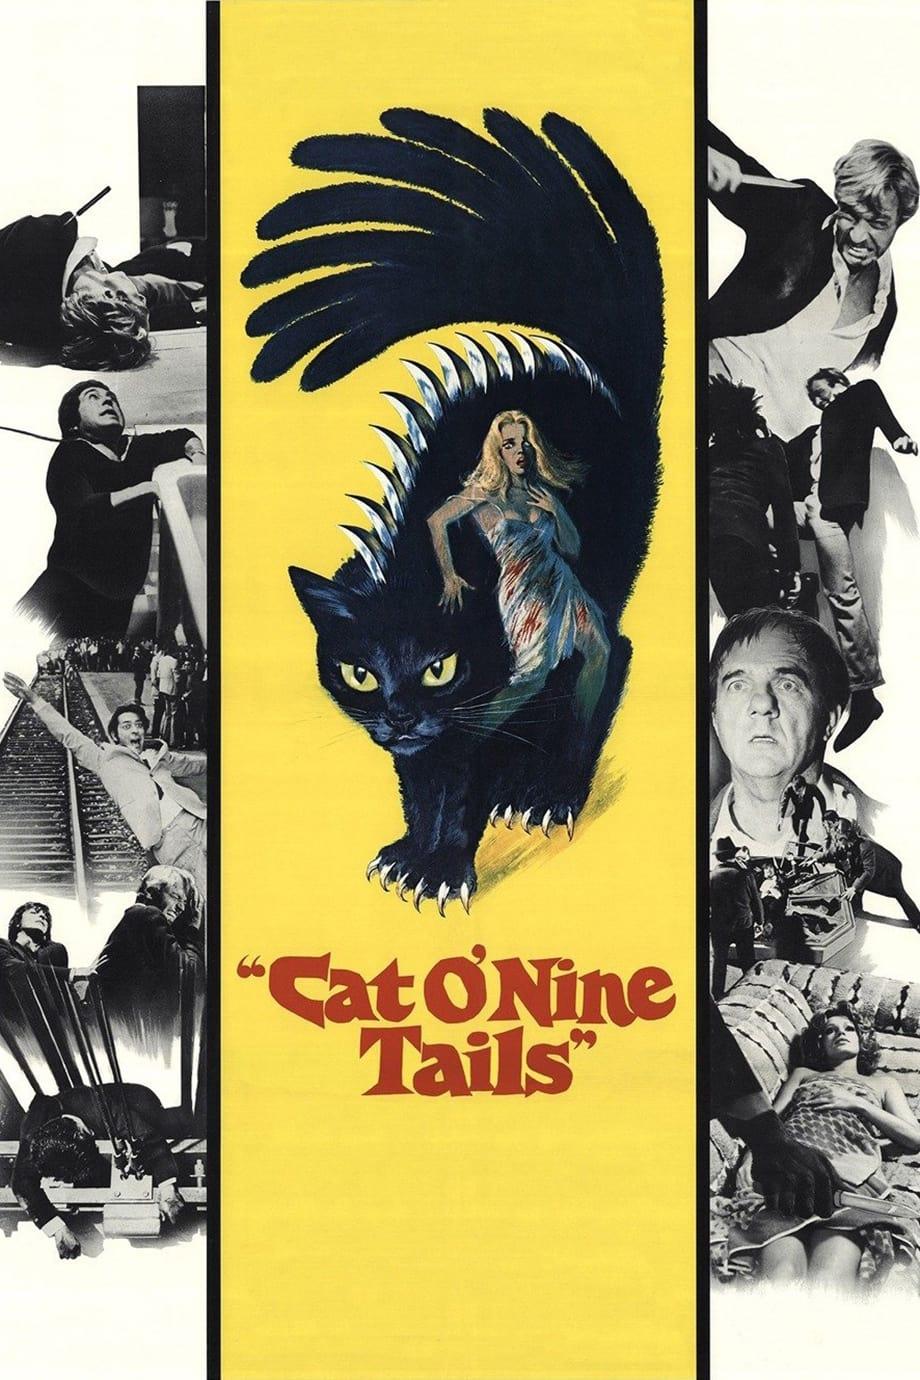 The Cat o' Nine Tails poster